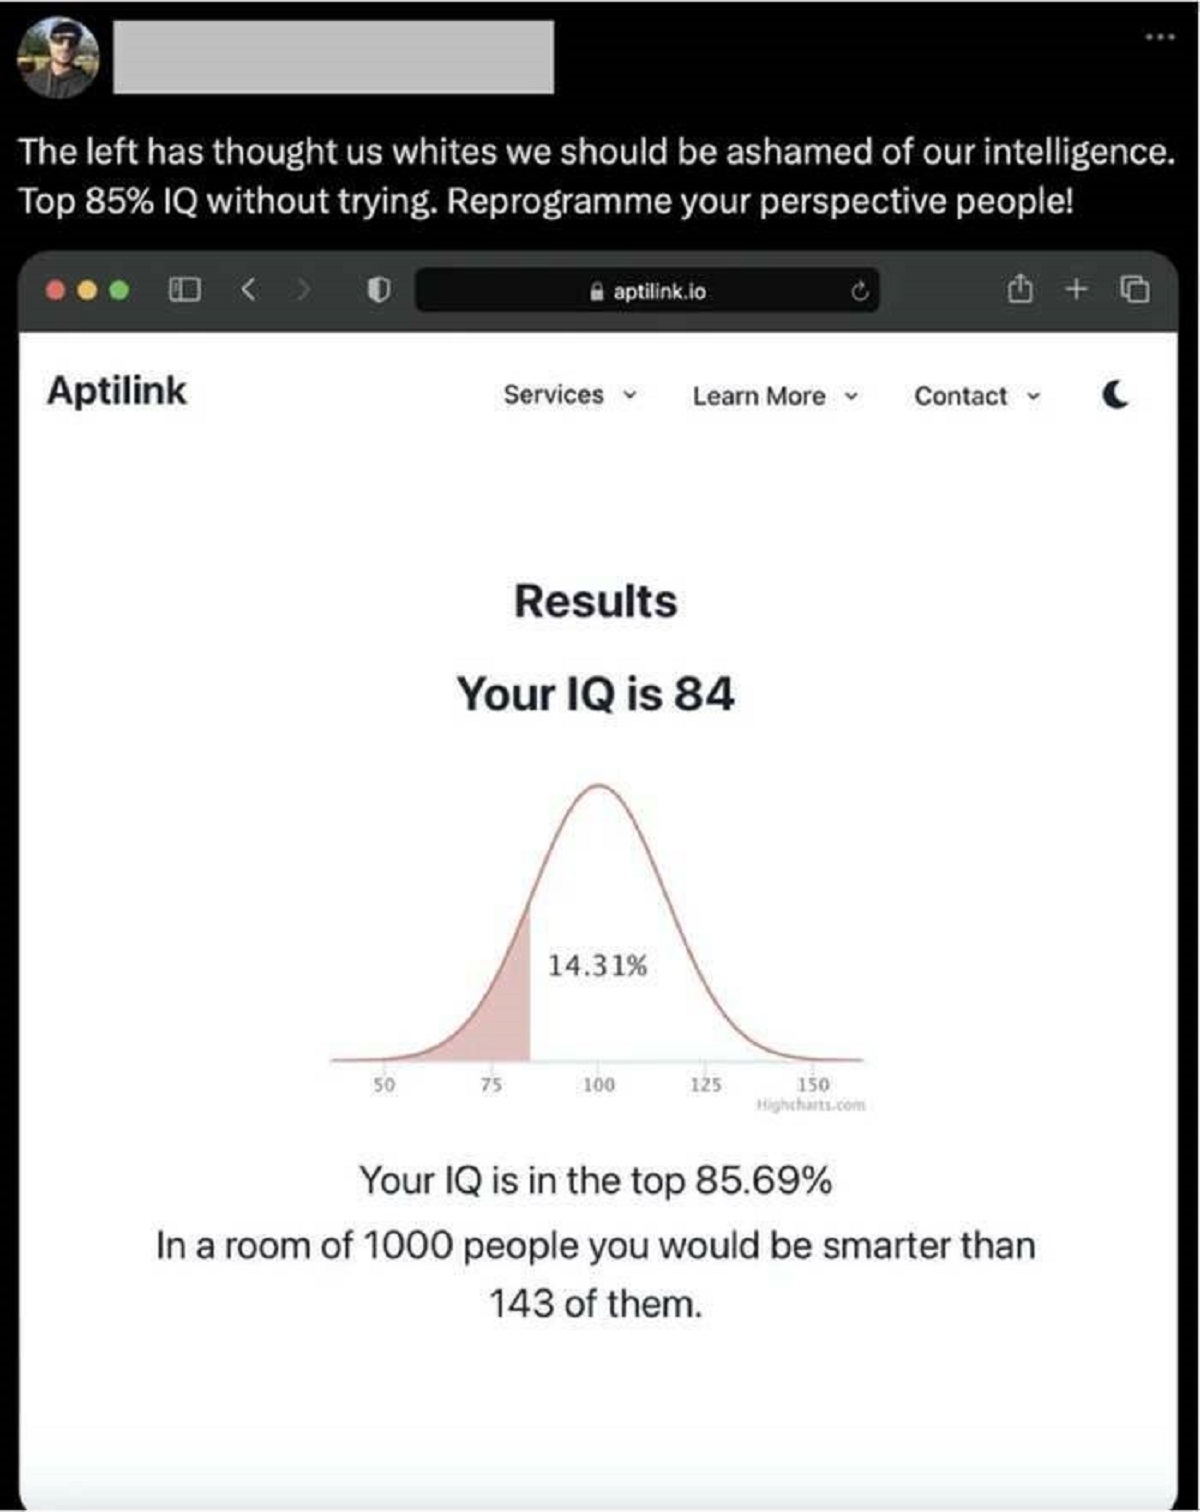 screenshot - The left has thought us whites we should be ashamed of our intelligence. Top 85% Iq without trying. Reprogramme your perspective people! Aptilink 50 aptilink.io Services Learn More Contact C Results Your Iq is 84 14.31% 100 125 150 Highcharts